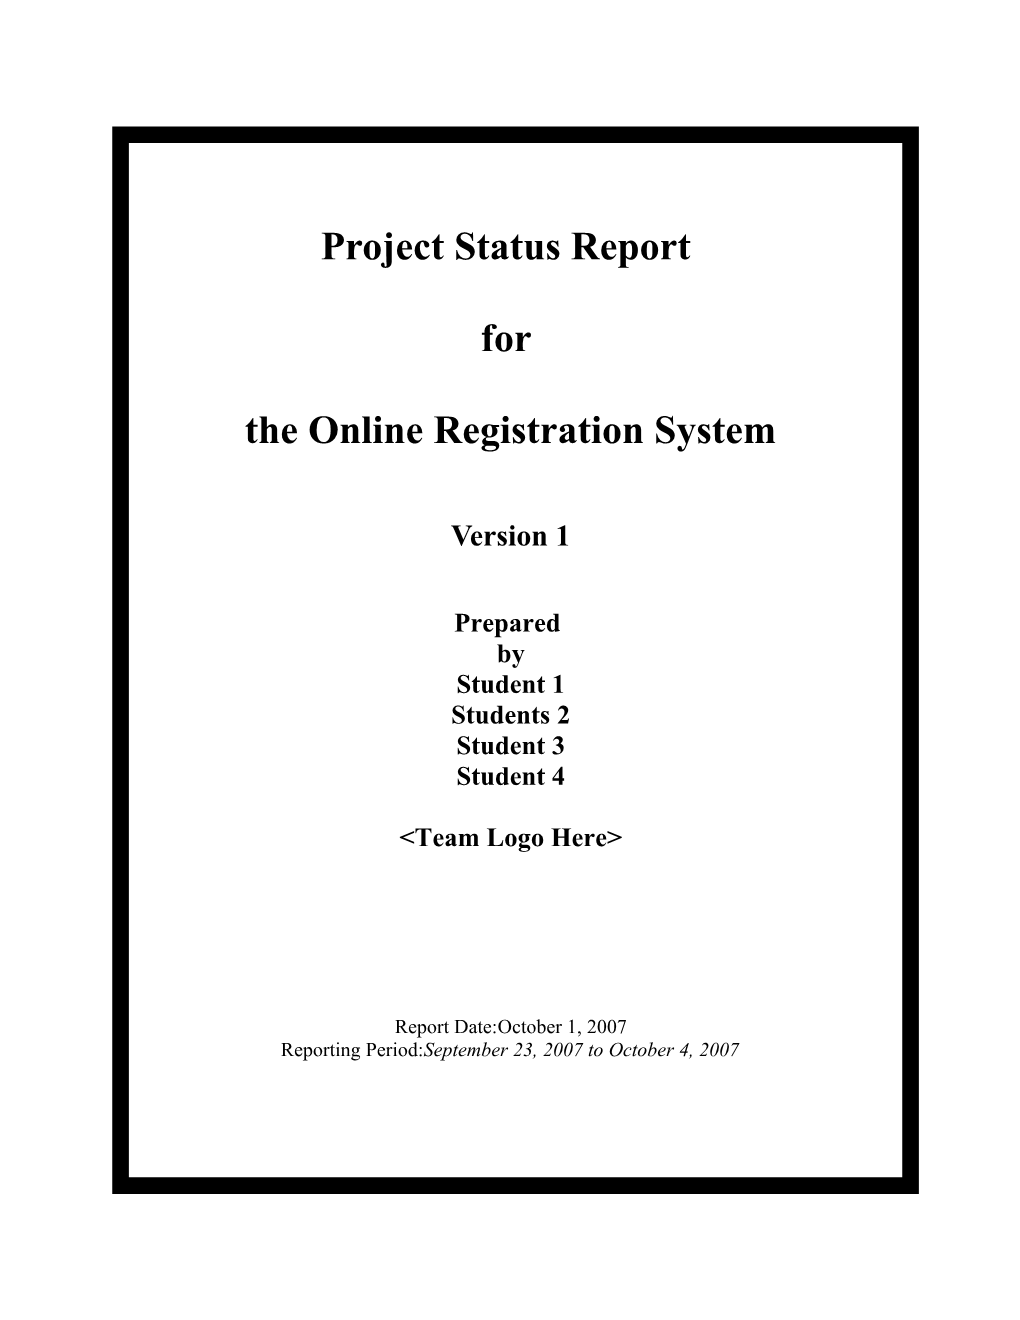 Project Status Report for Project